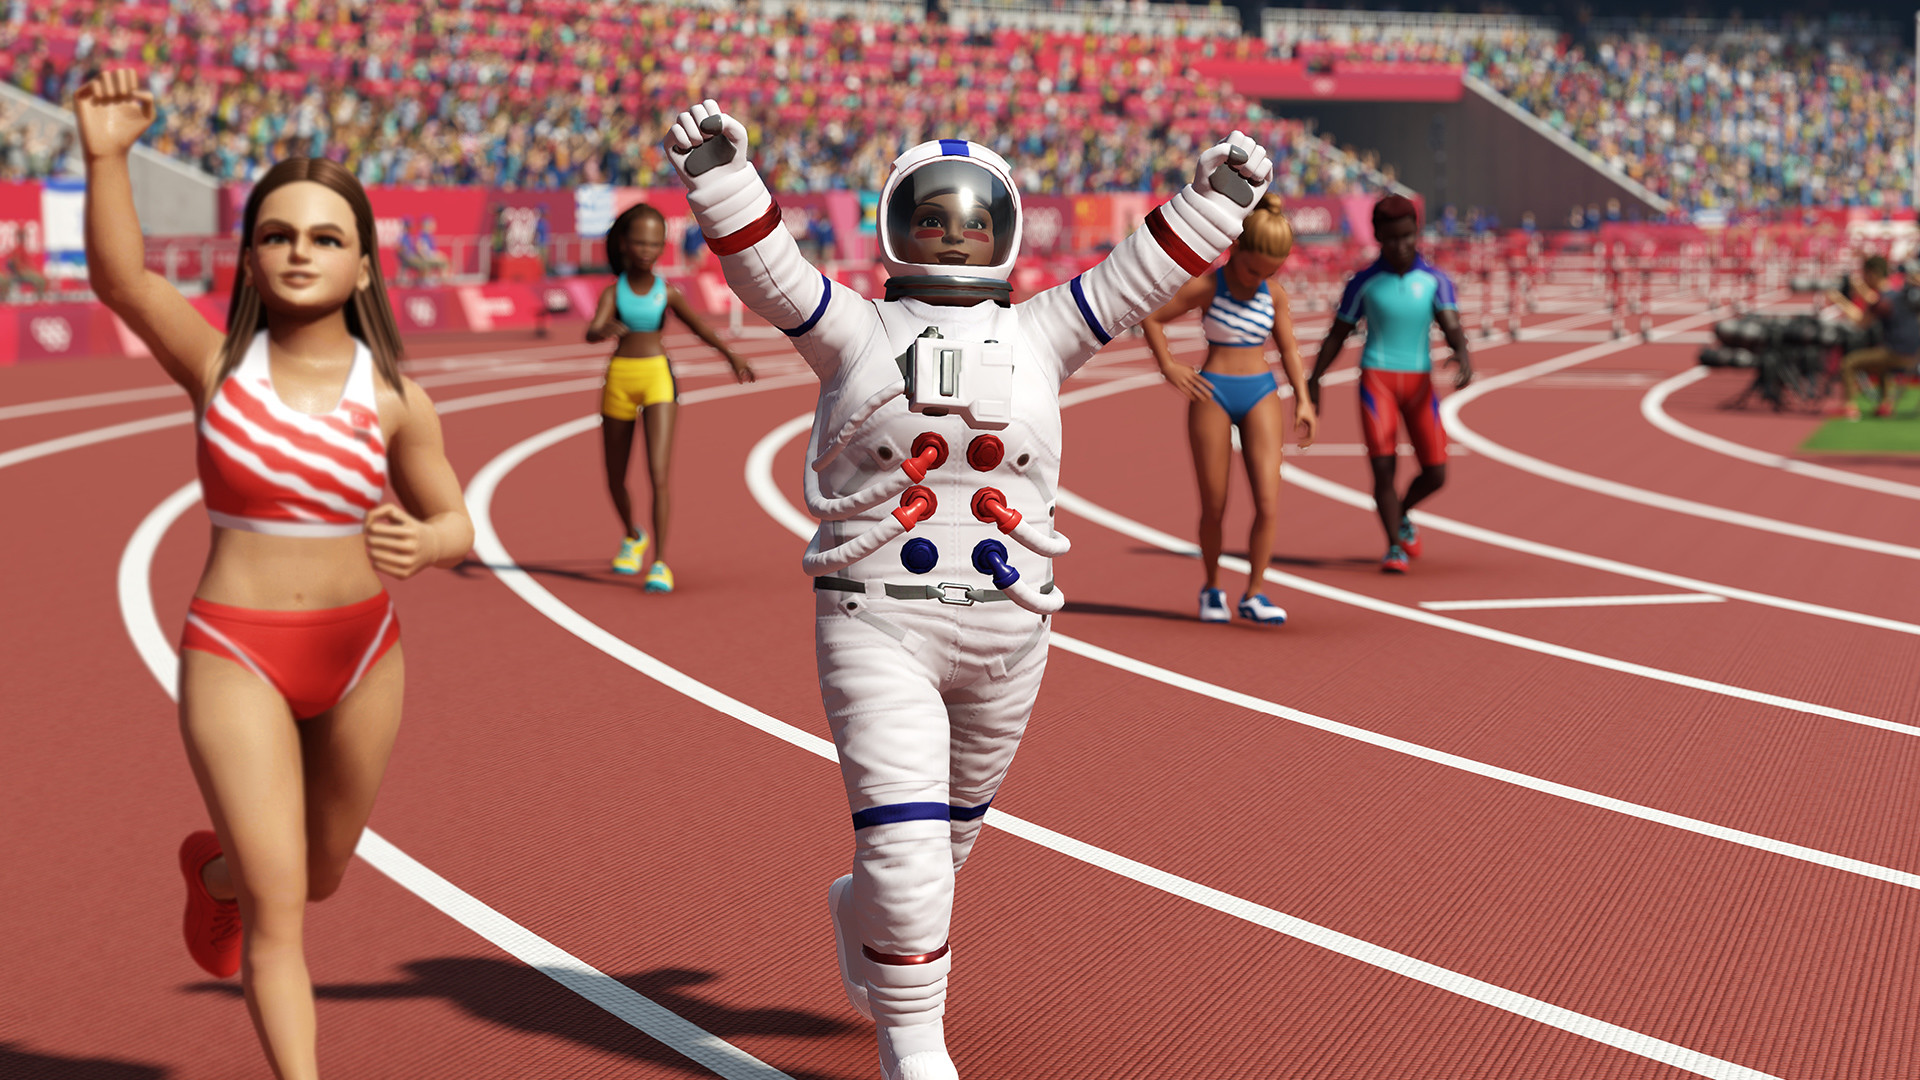 Olympic Games Tokyo 2020 - The Official Video Game EU Steam CD Key 9.45 usd